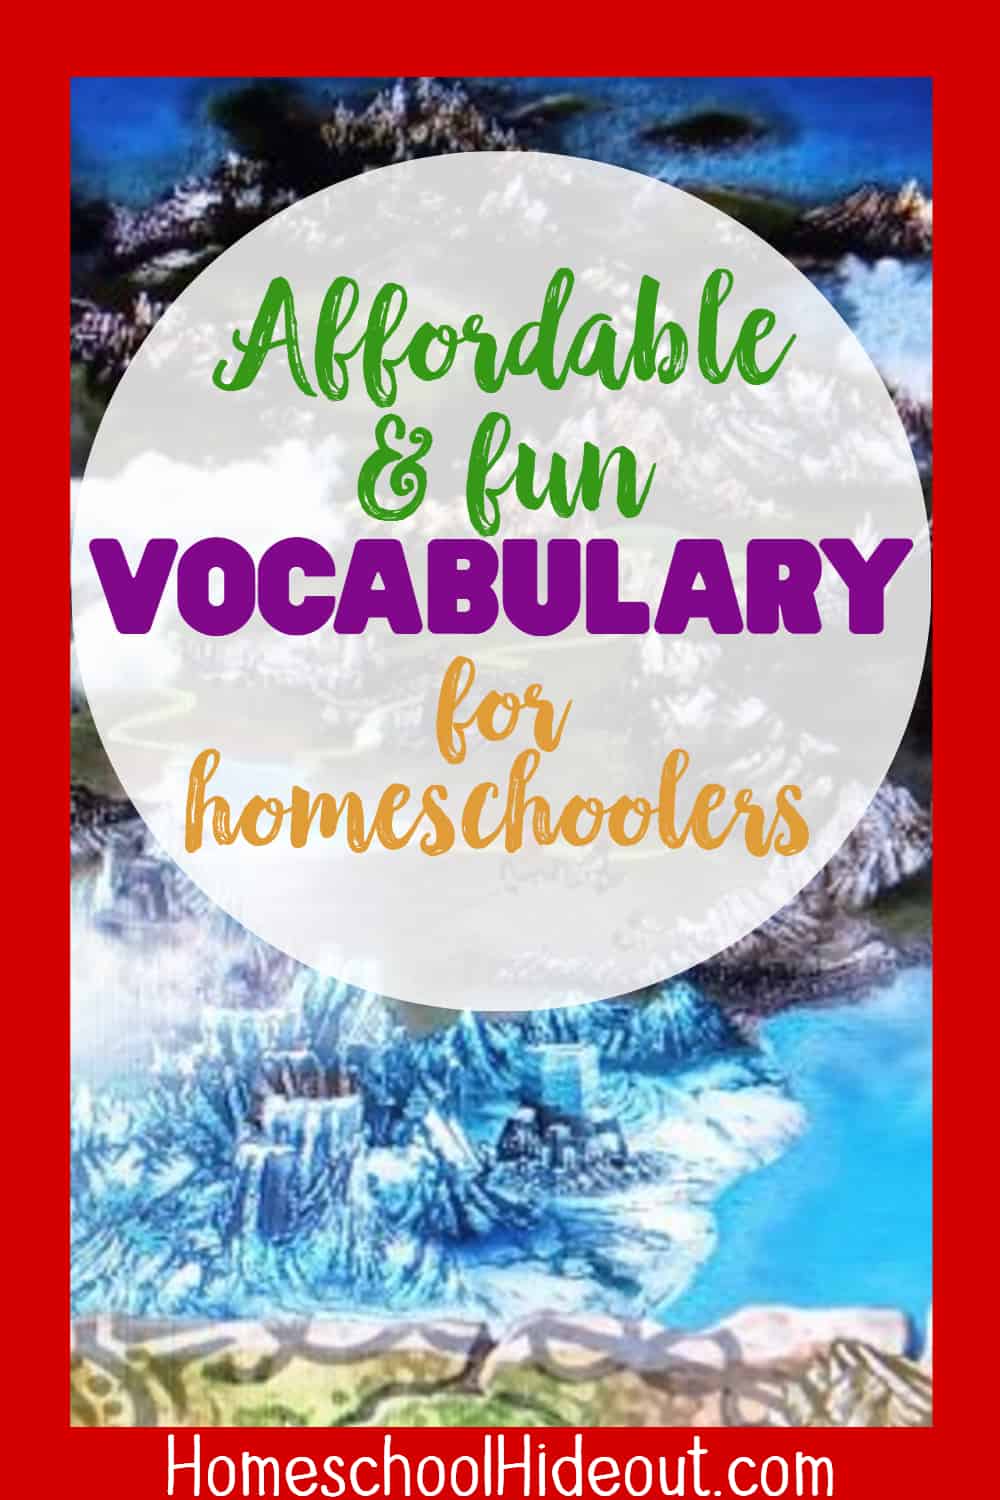 Vocabulary Quest is the perfect way to ACTAULLY get vocab done in your homeschool! It's fun and affordable, just what busy moms need! #vocabulary #homeschooling #homeschoolonabudget